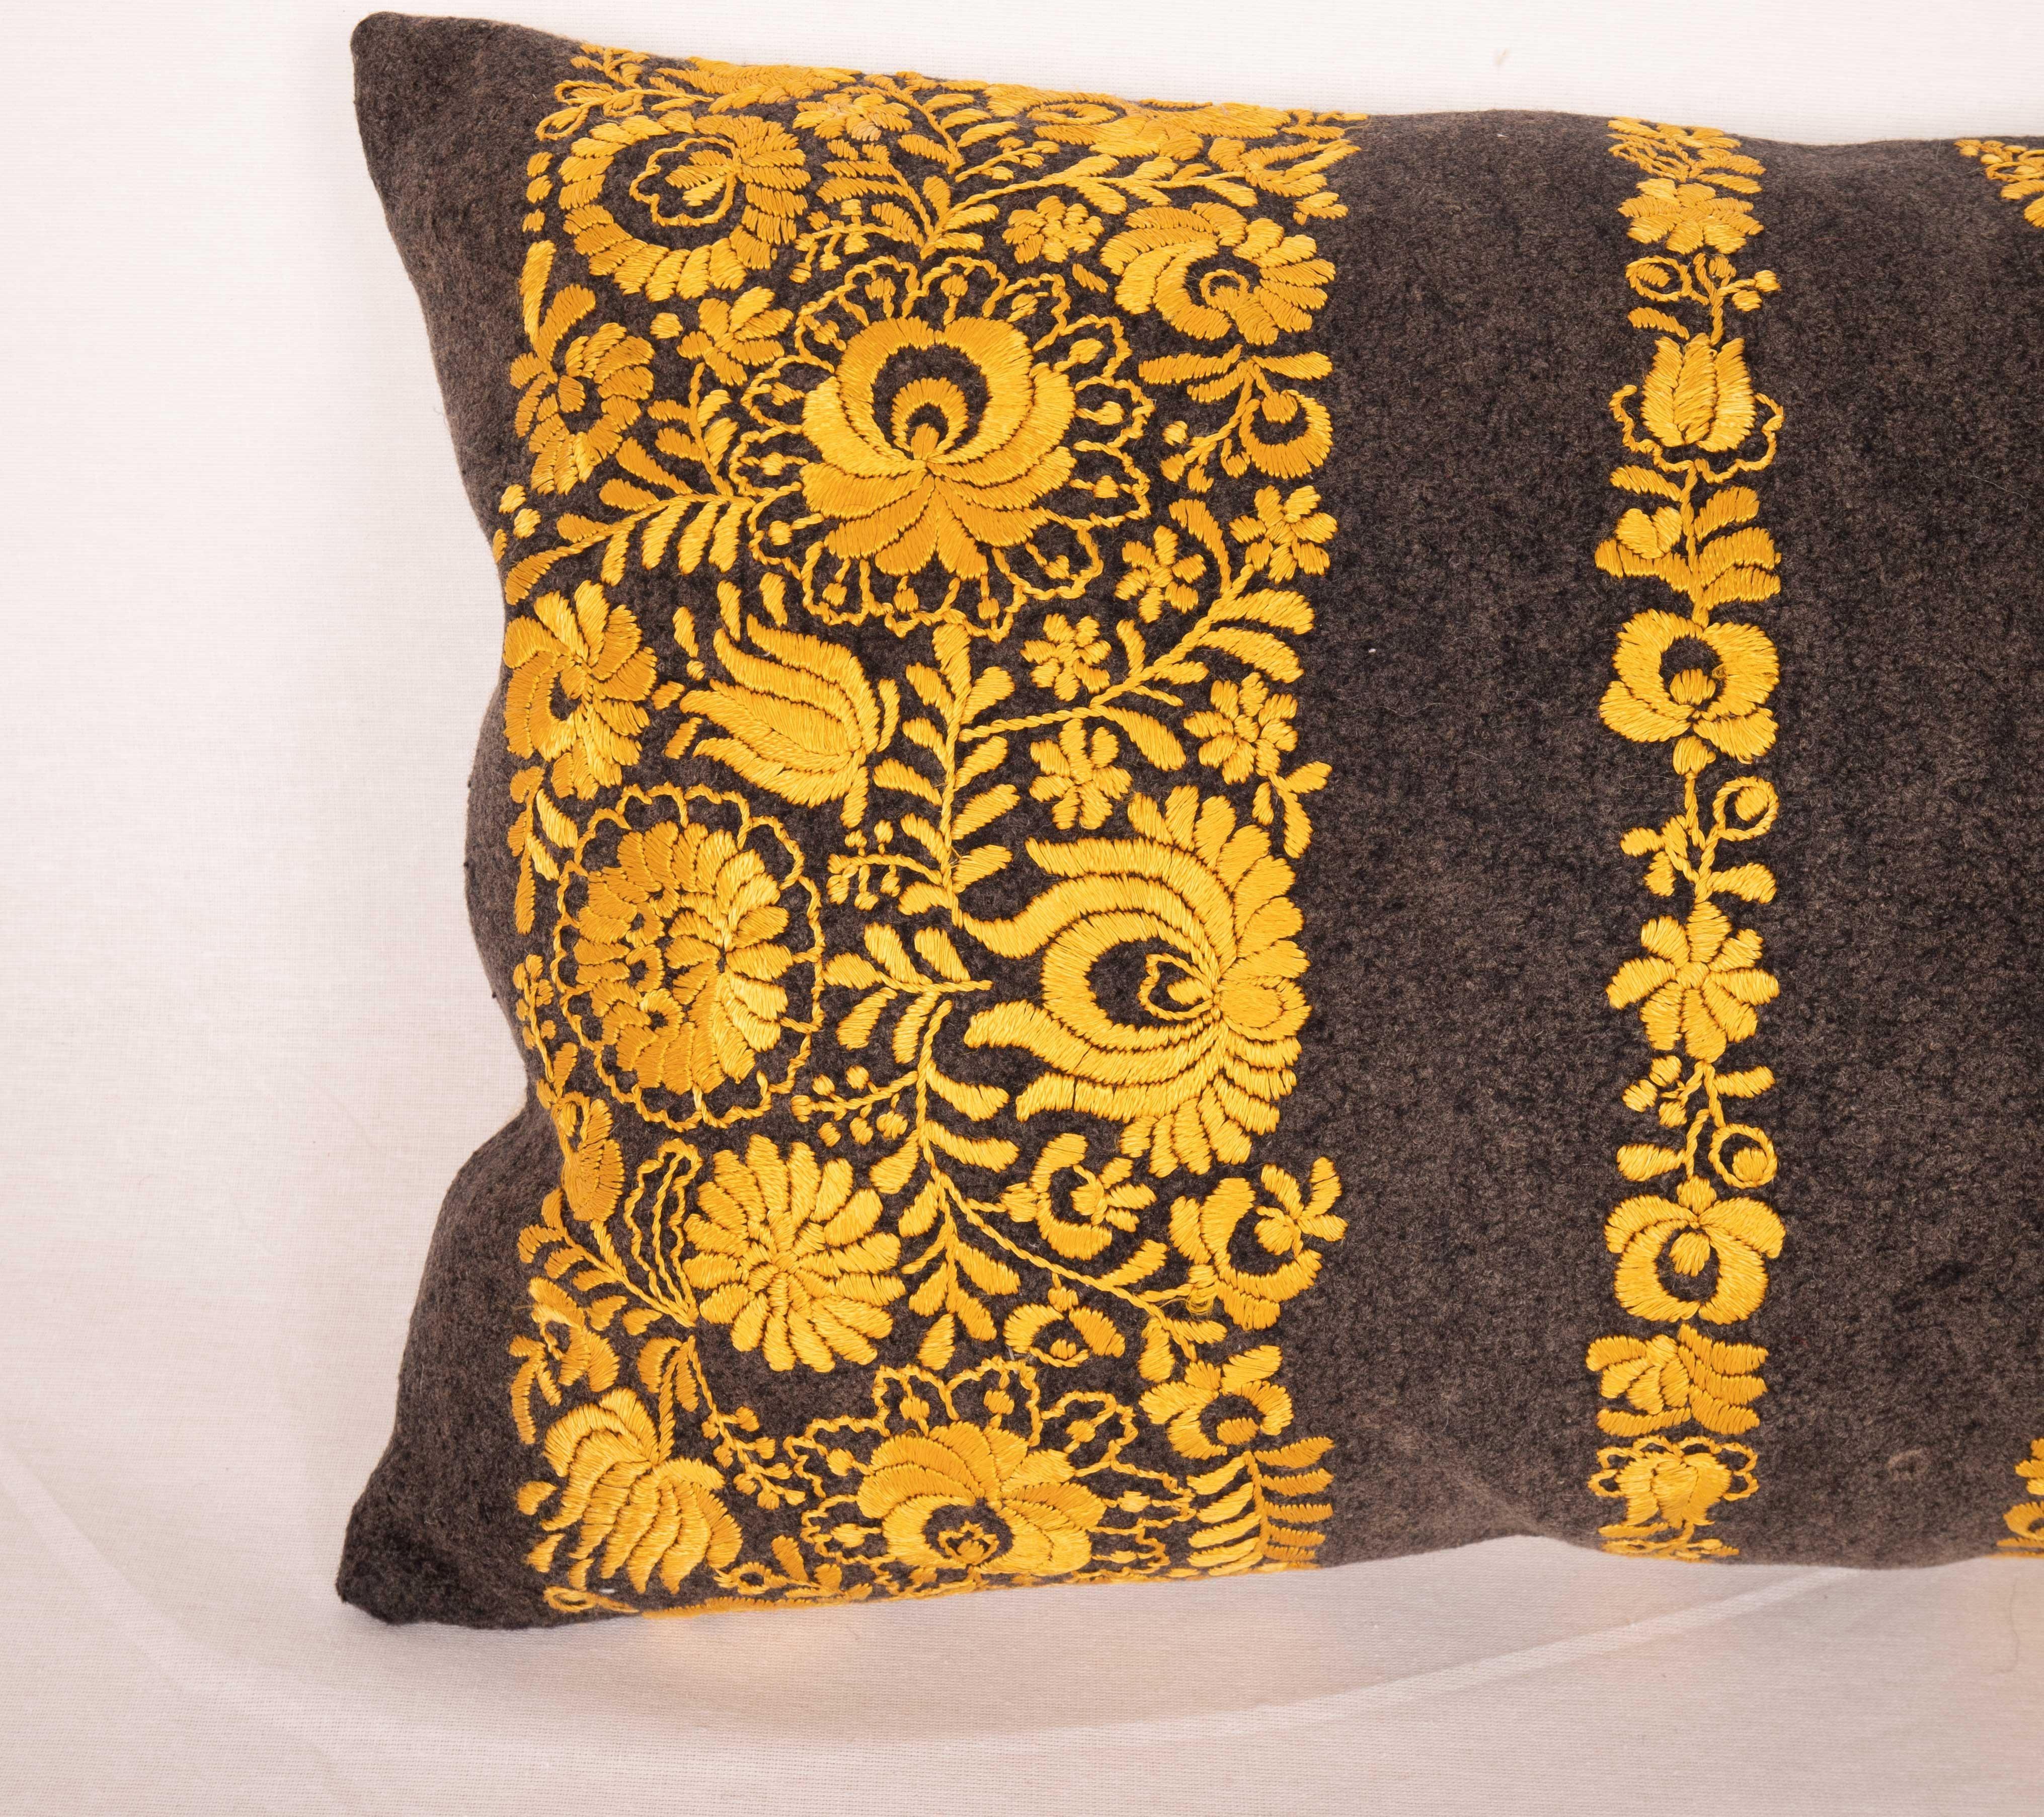 Suzani Hungarian Matyo Pillow Case, Early 20th C. For Sale